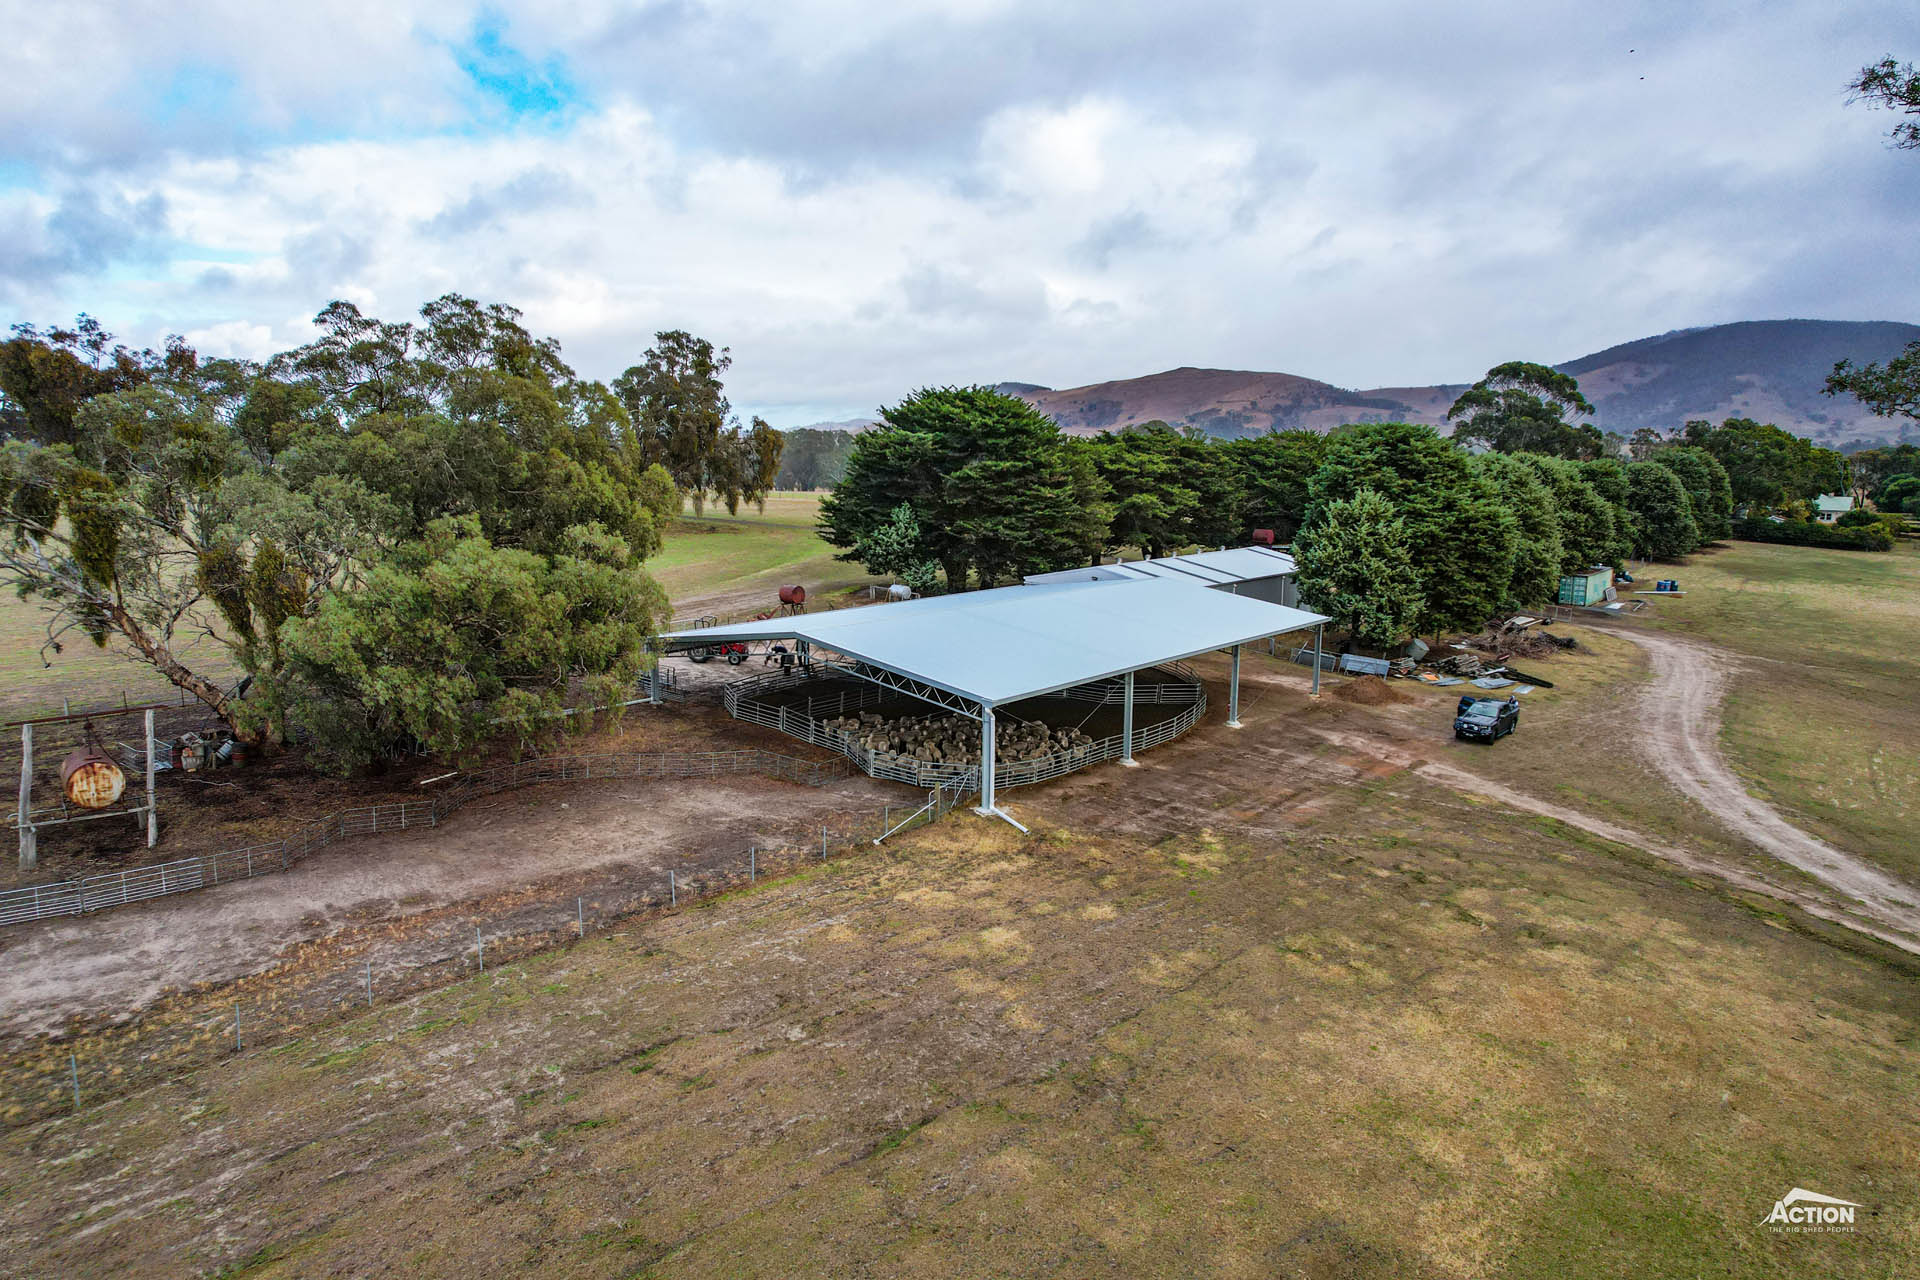 You are currently viewing 30m x 21m x 3m sheep yard cover